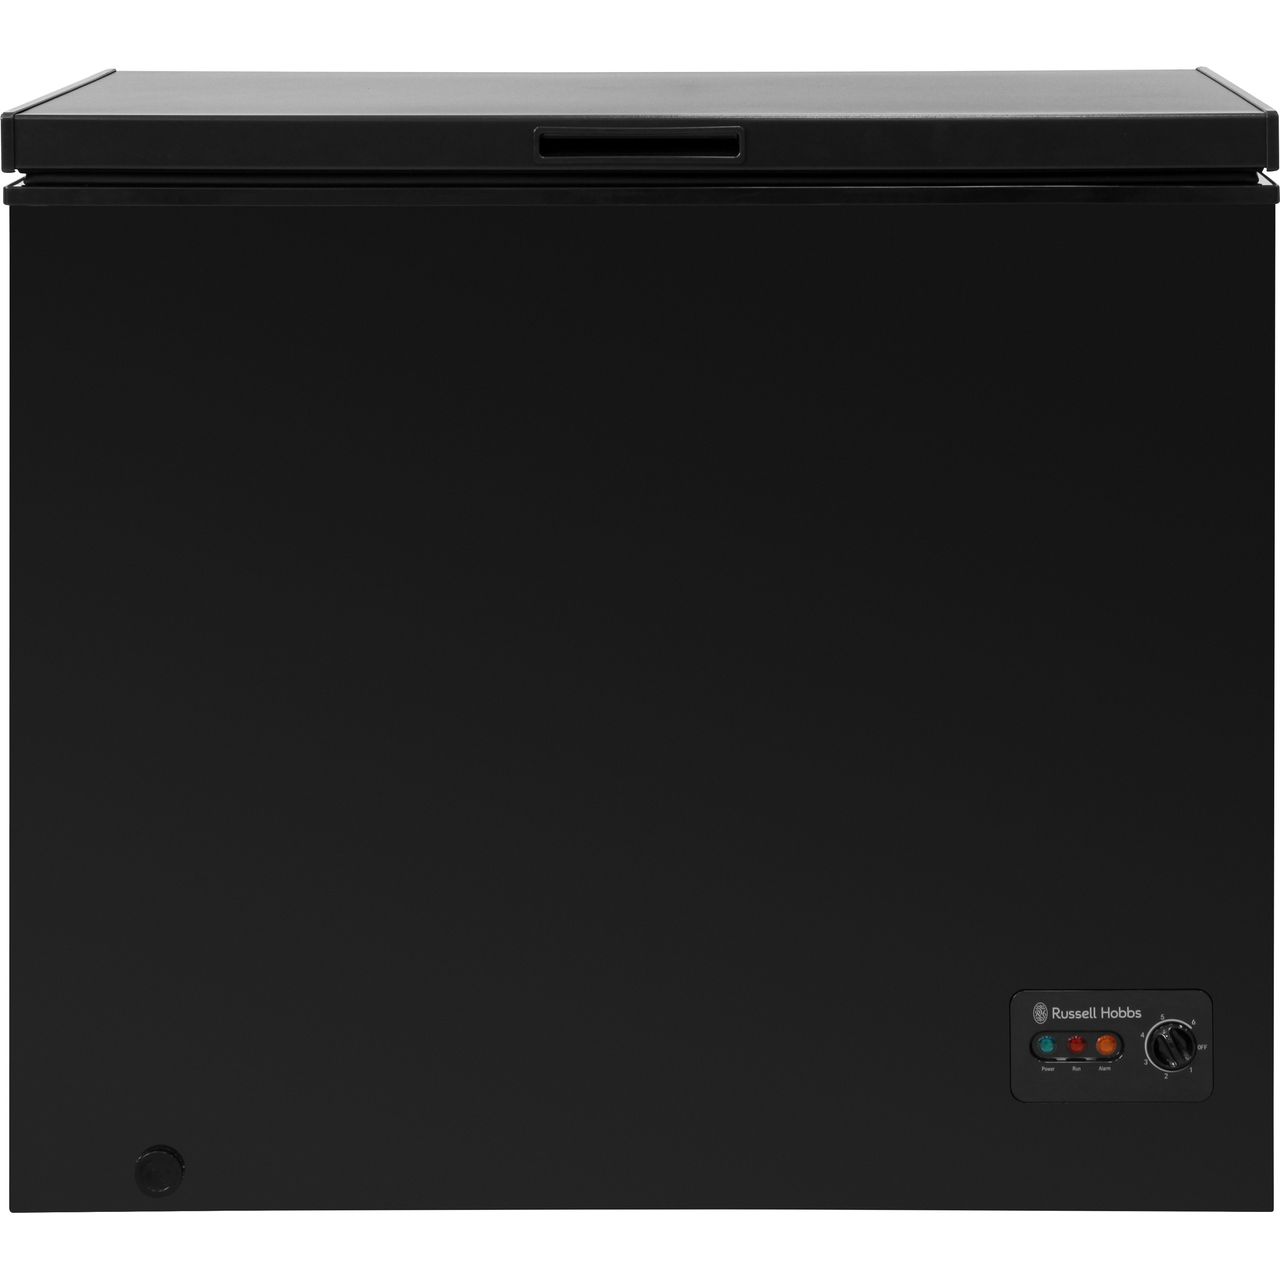 Russell Hobbs RHCF198B Chest Freezer Review